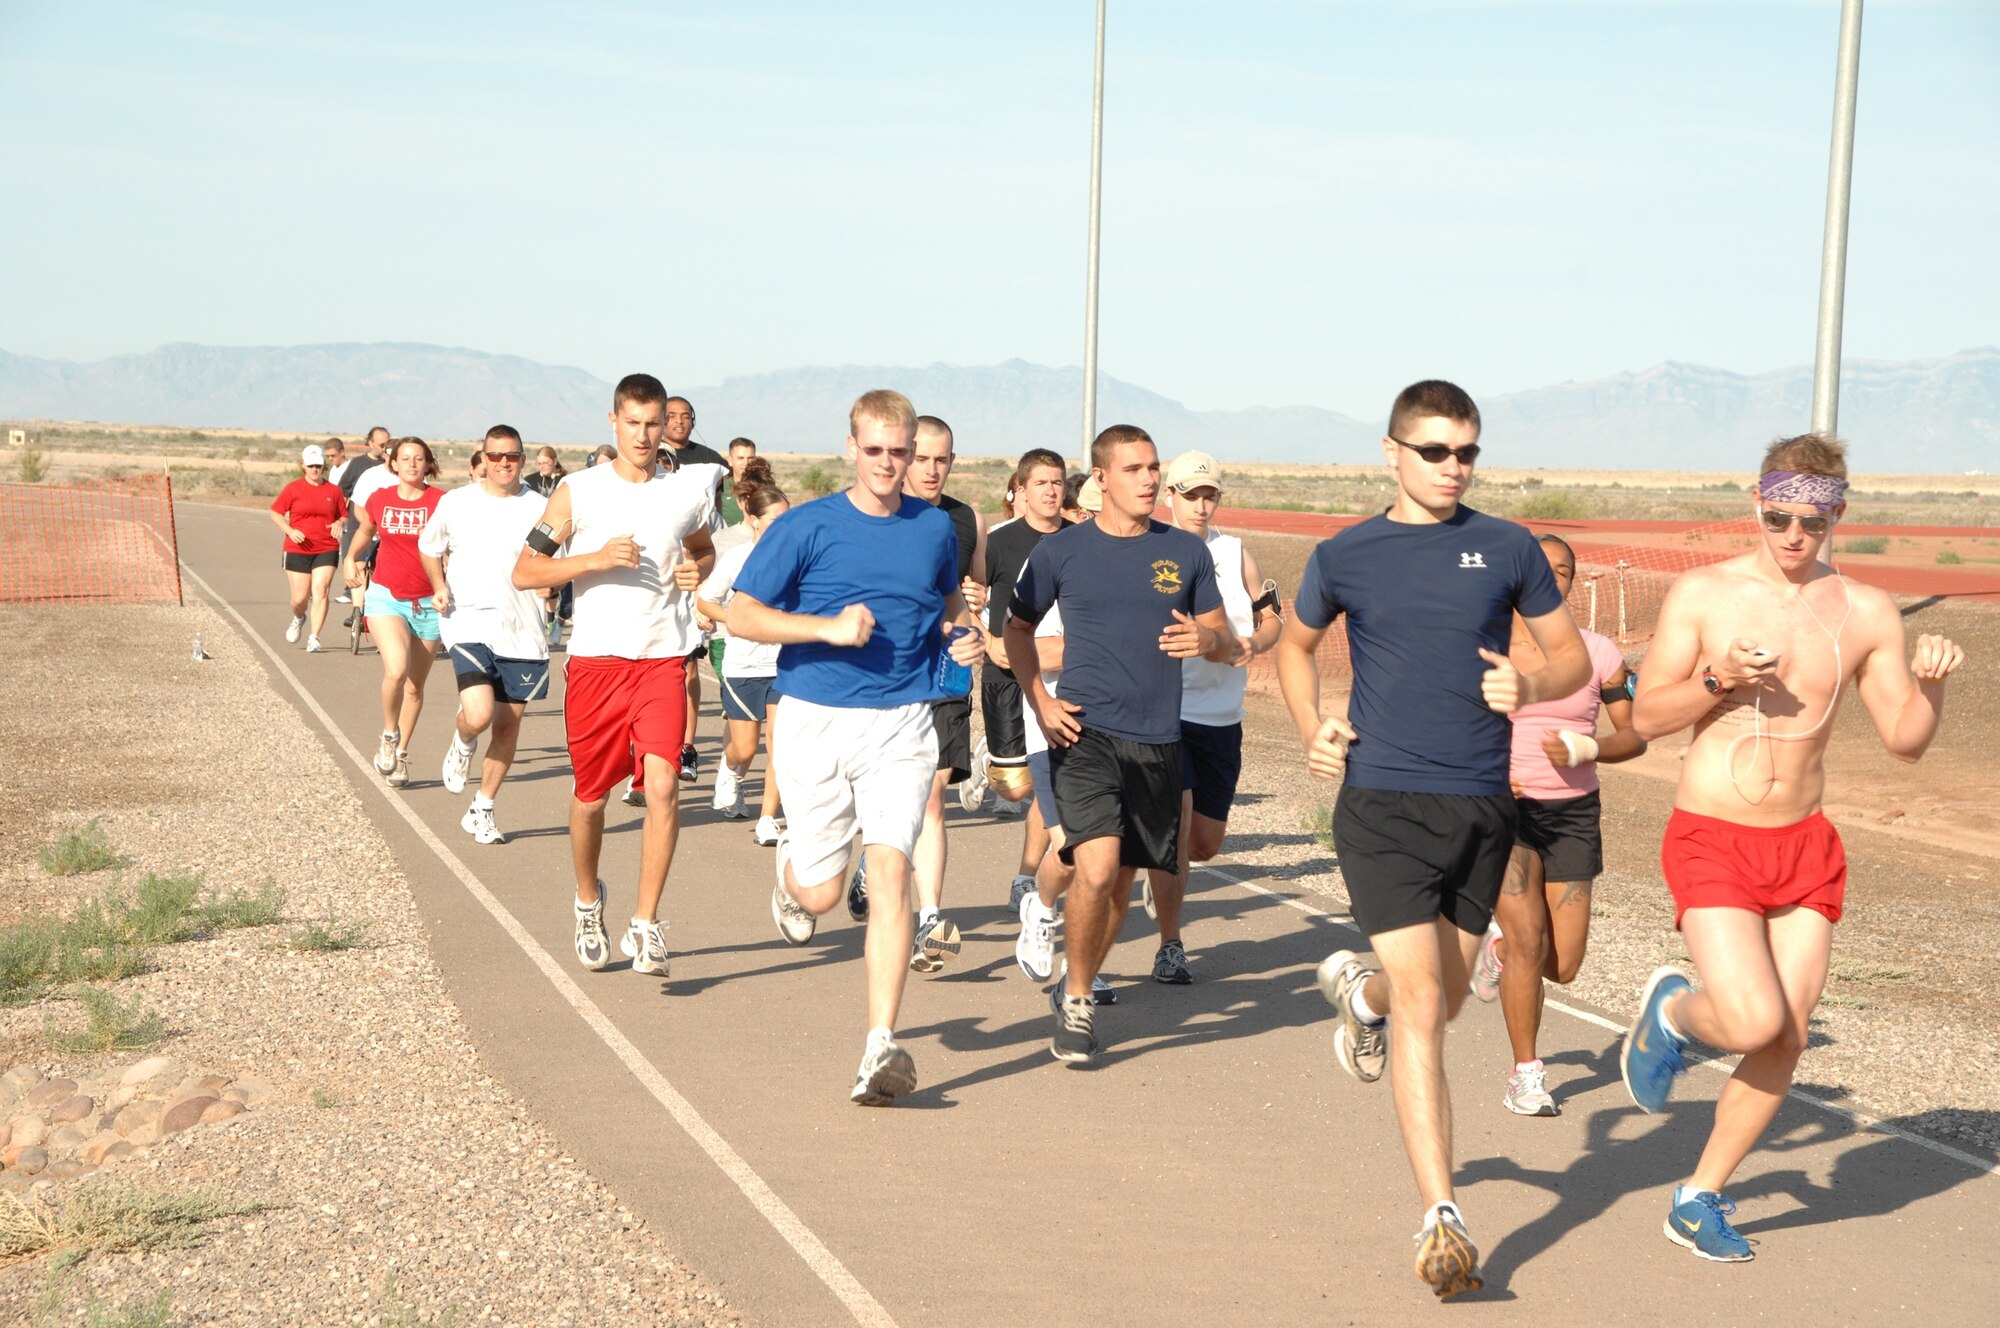 Members of the 49th Fighter Wing participate in a fun run July 3 as part of the Freedom Fest Independence Day celebration. (U.S. Air Force photo by Airman 1st Class Jamal Sutter)

